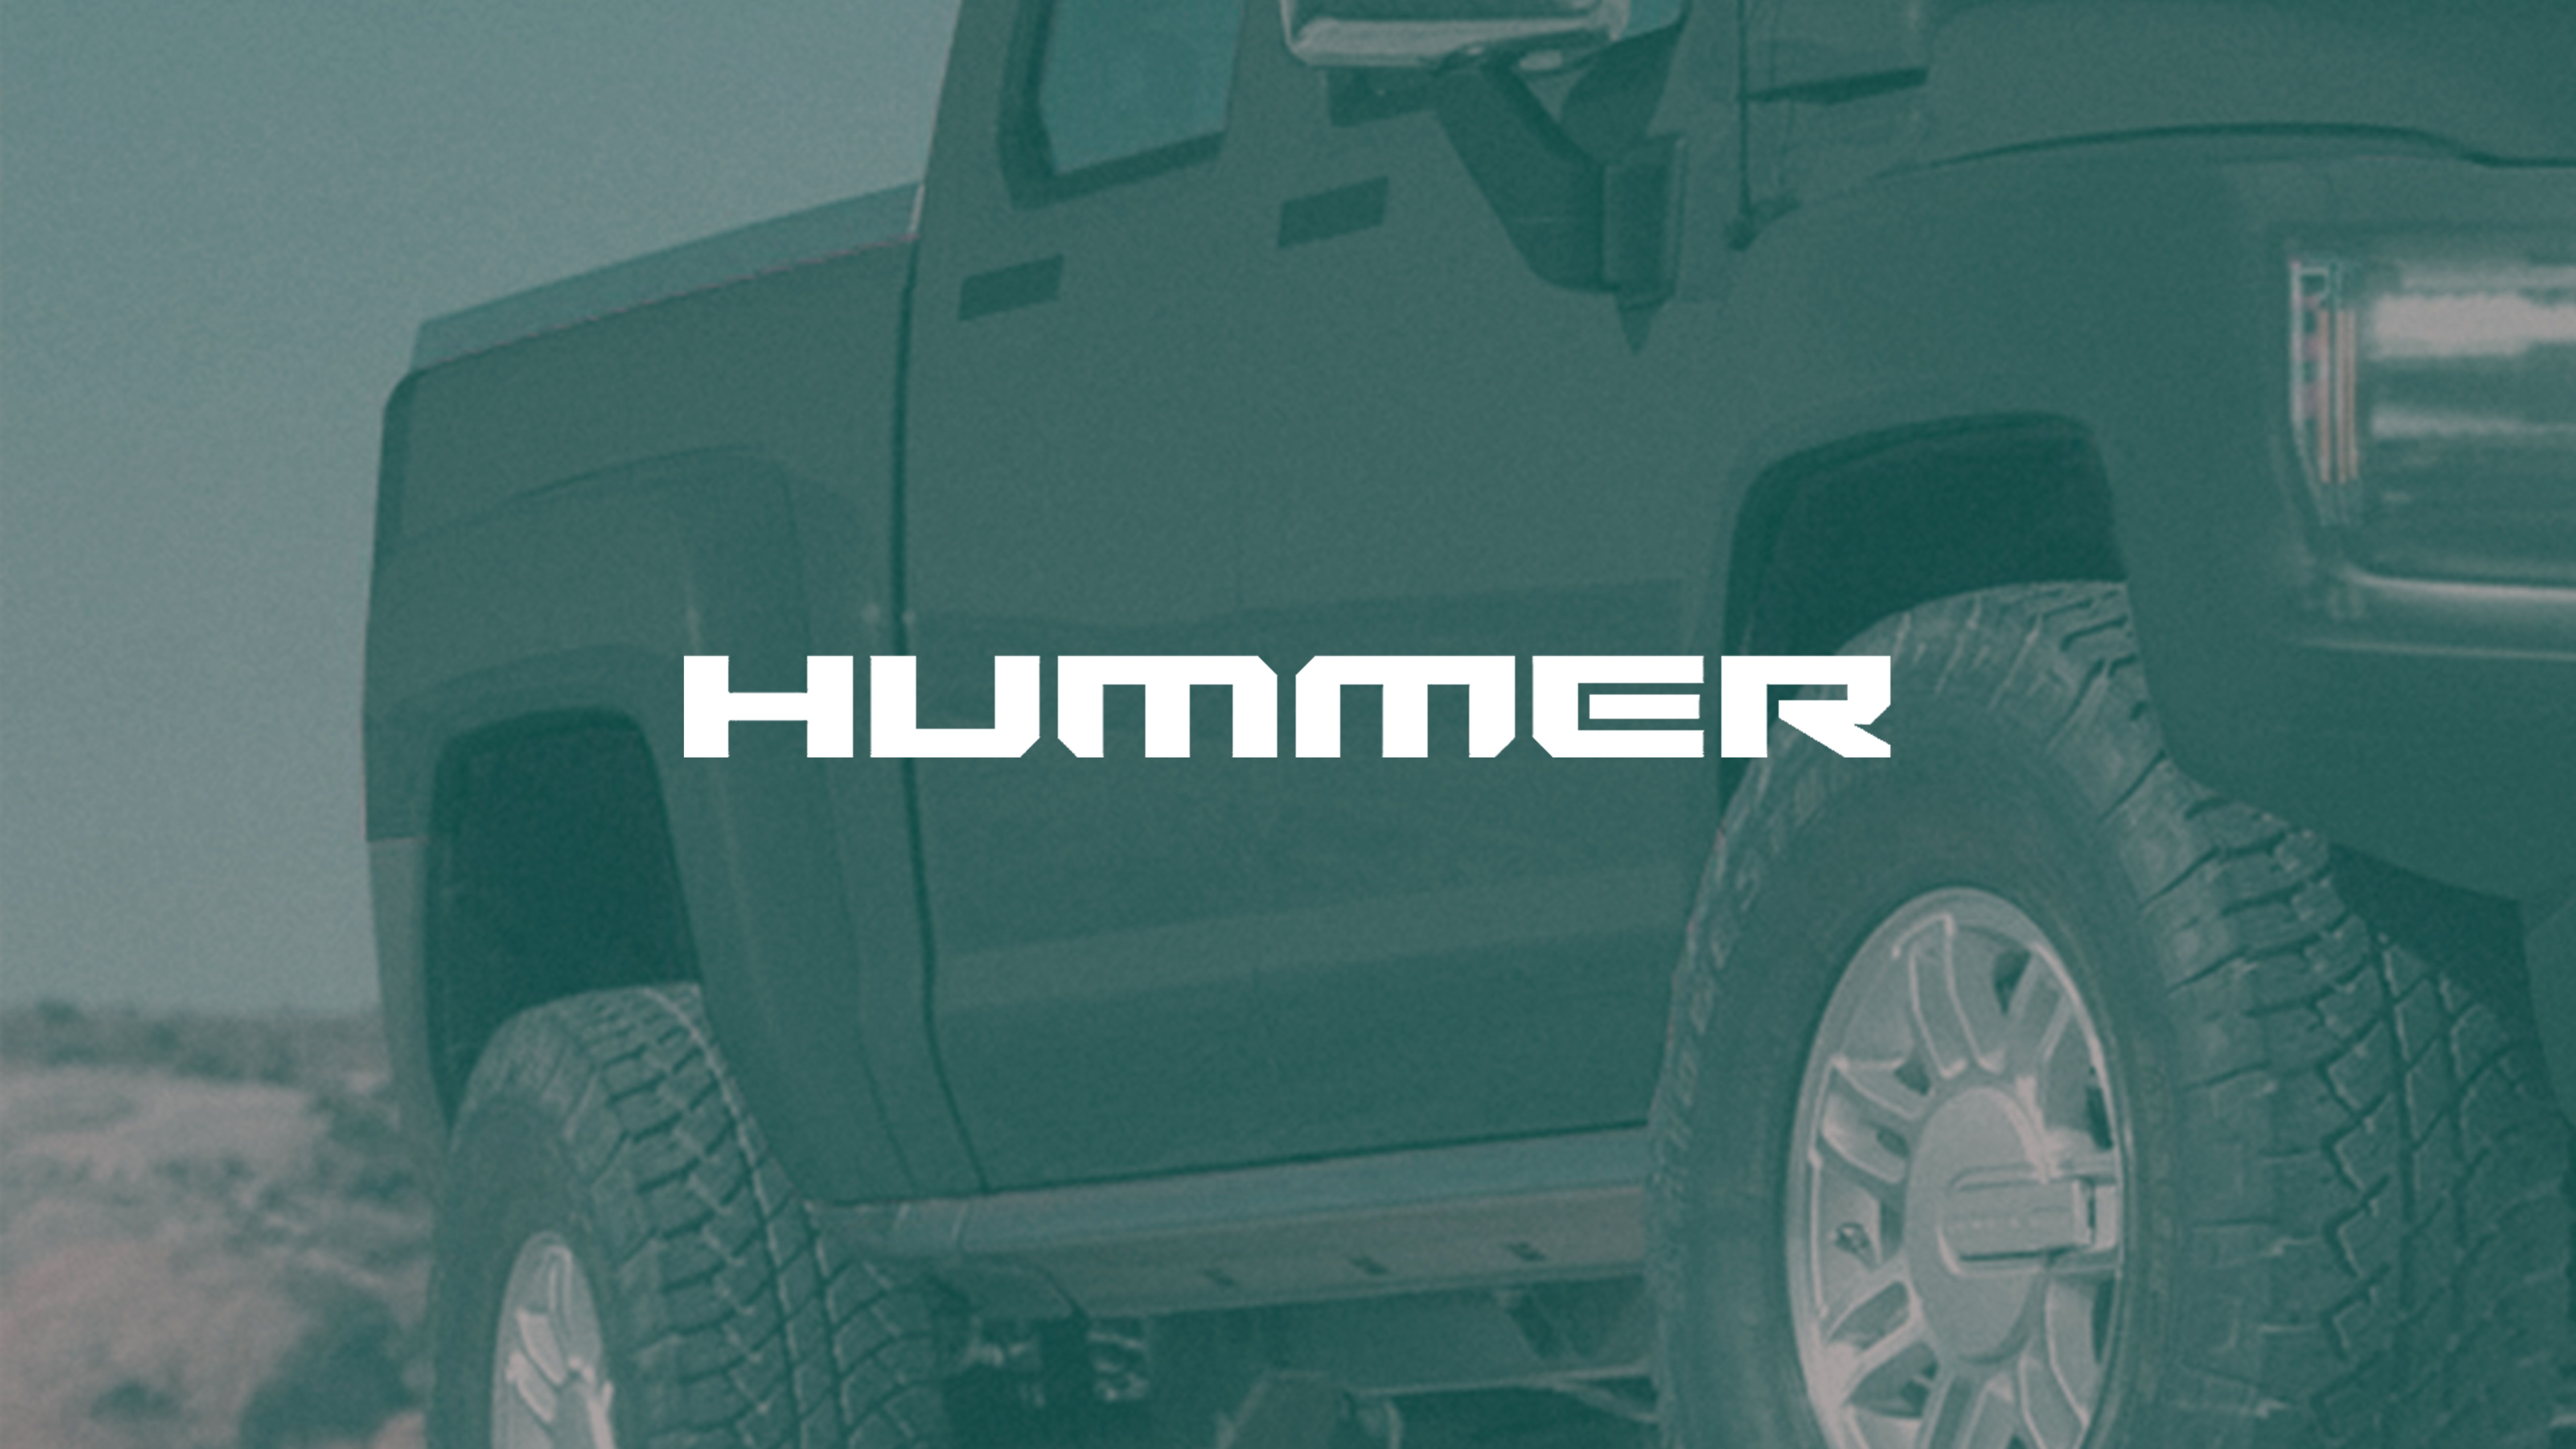 VW and Hummer create new logos to help shed lingering image as